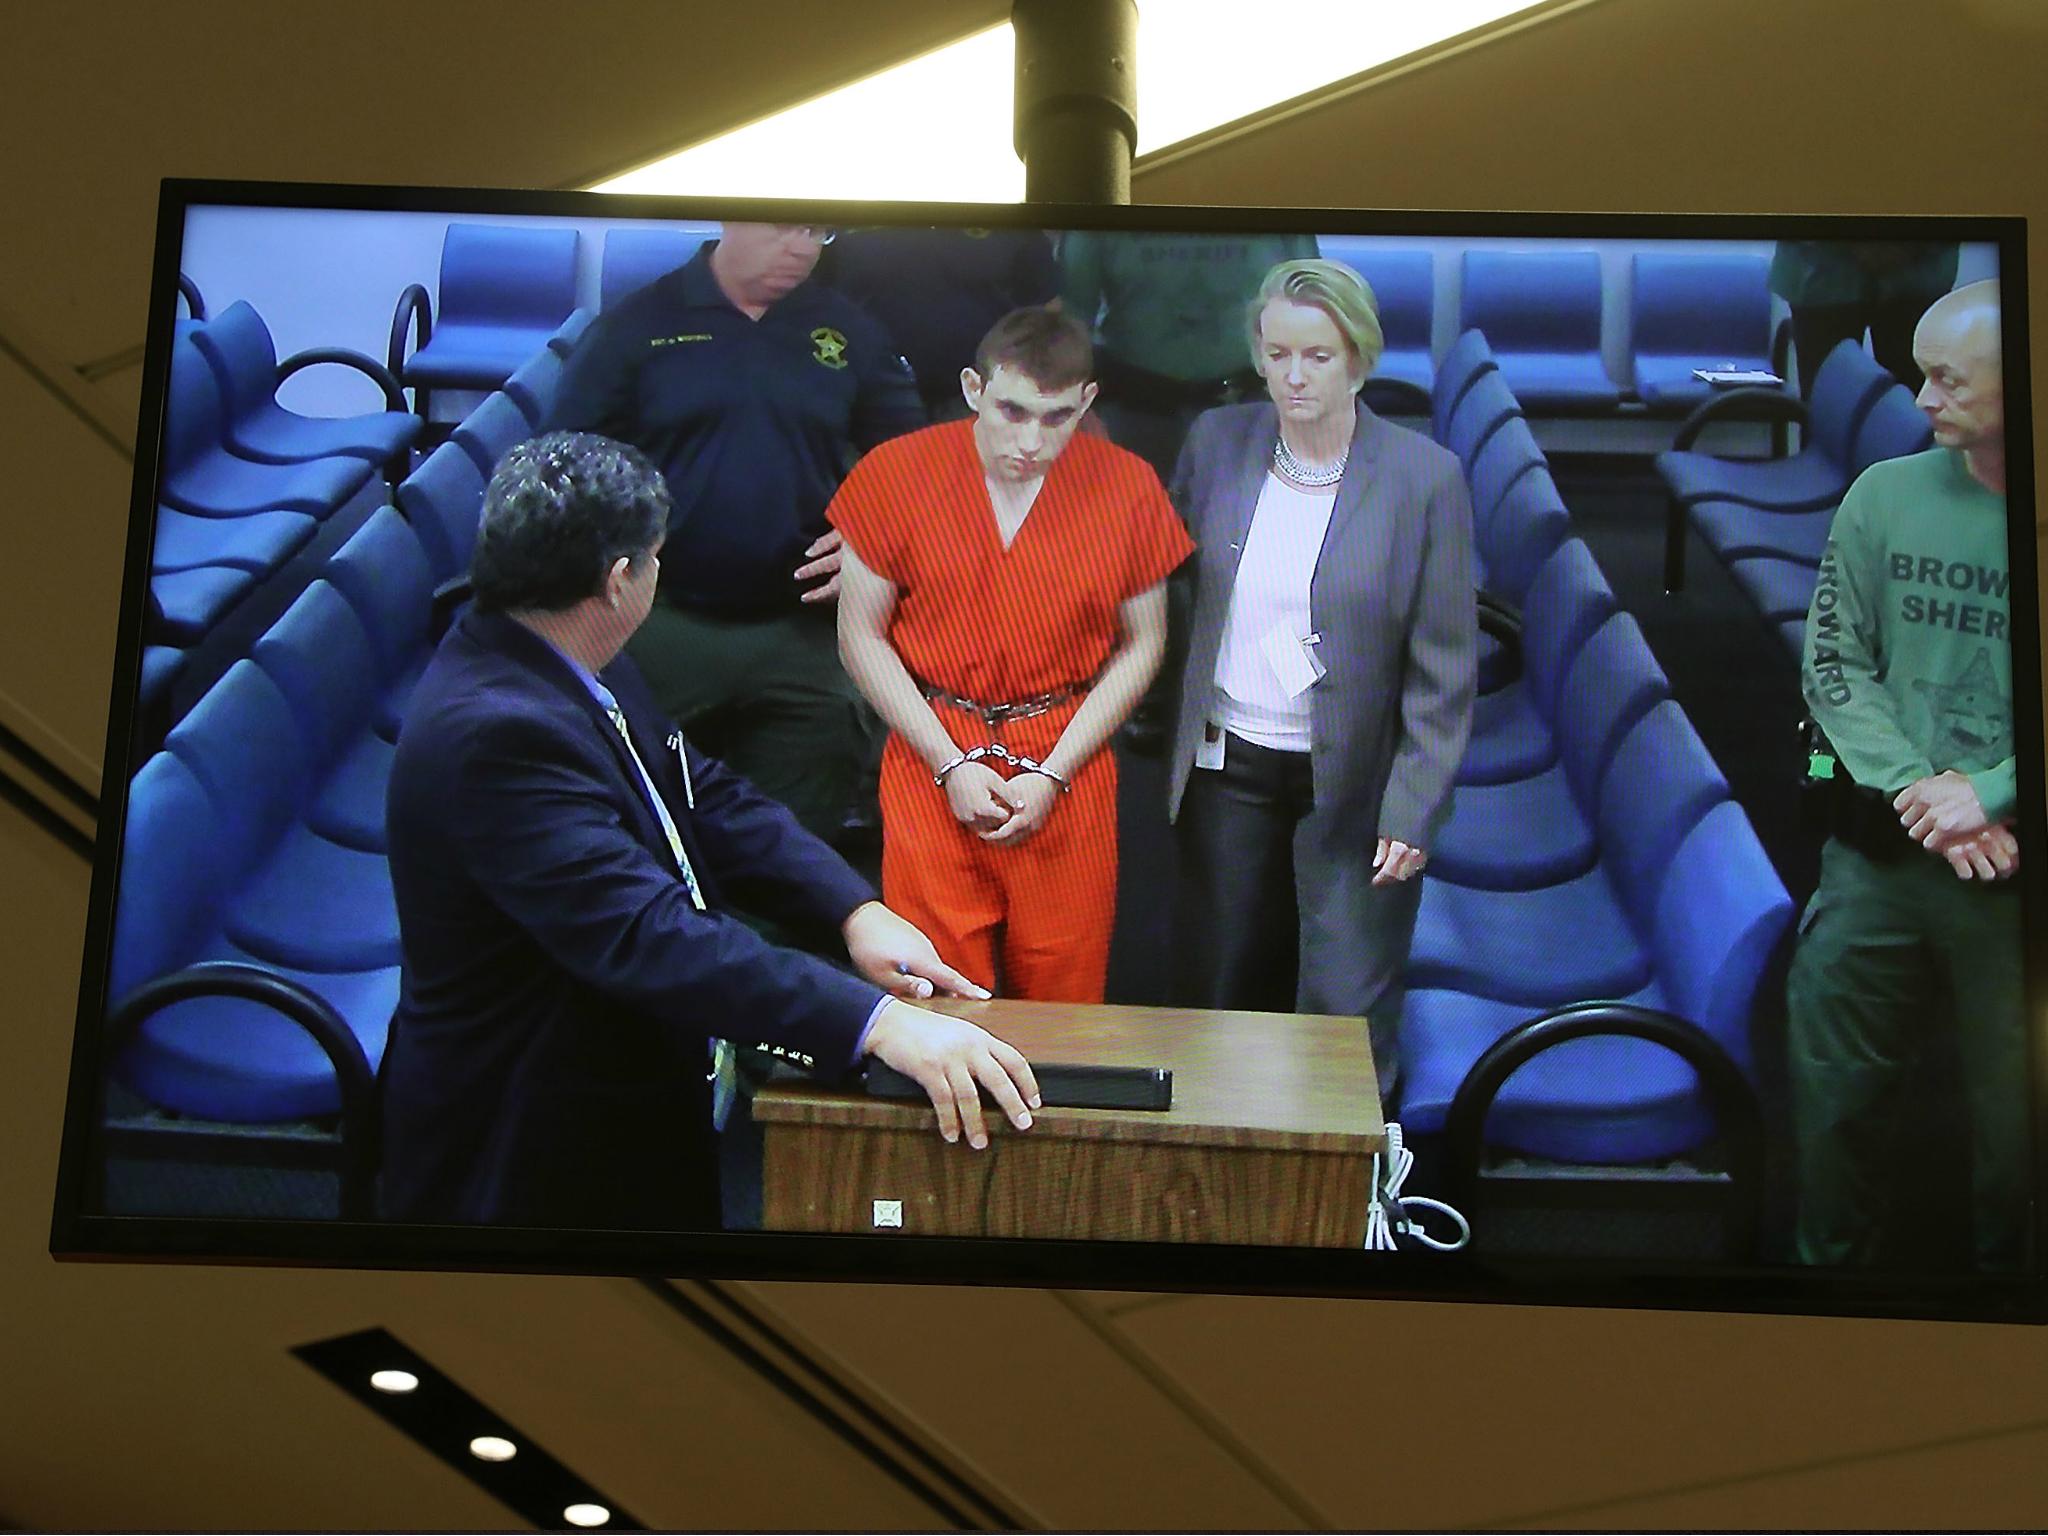 Nikolas Cruz, suspect in the Parkland, Florida school shooting, is seen on a closed circuit television screen during a bond hearing on 15 February 2018.